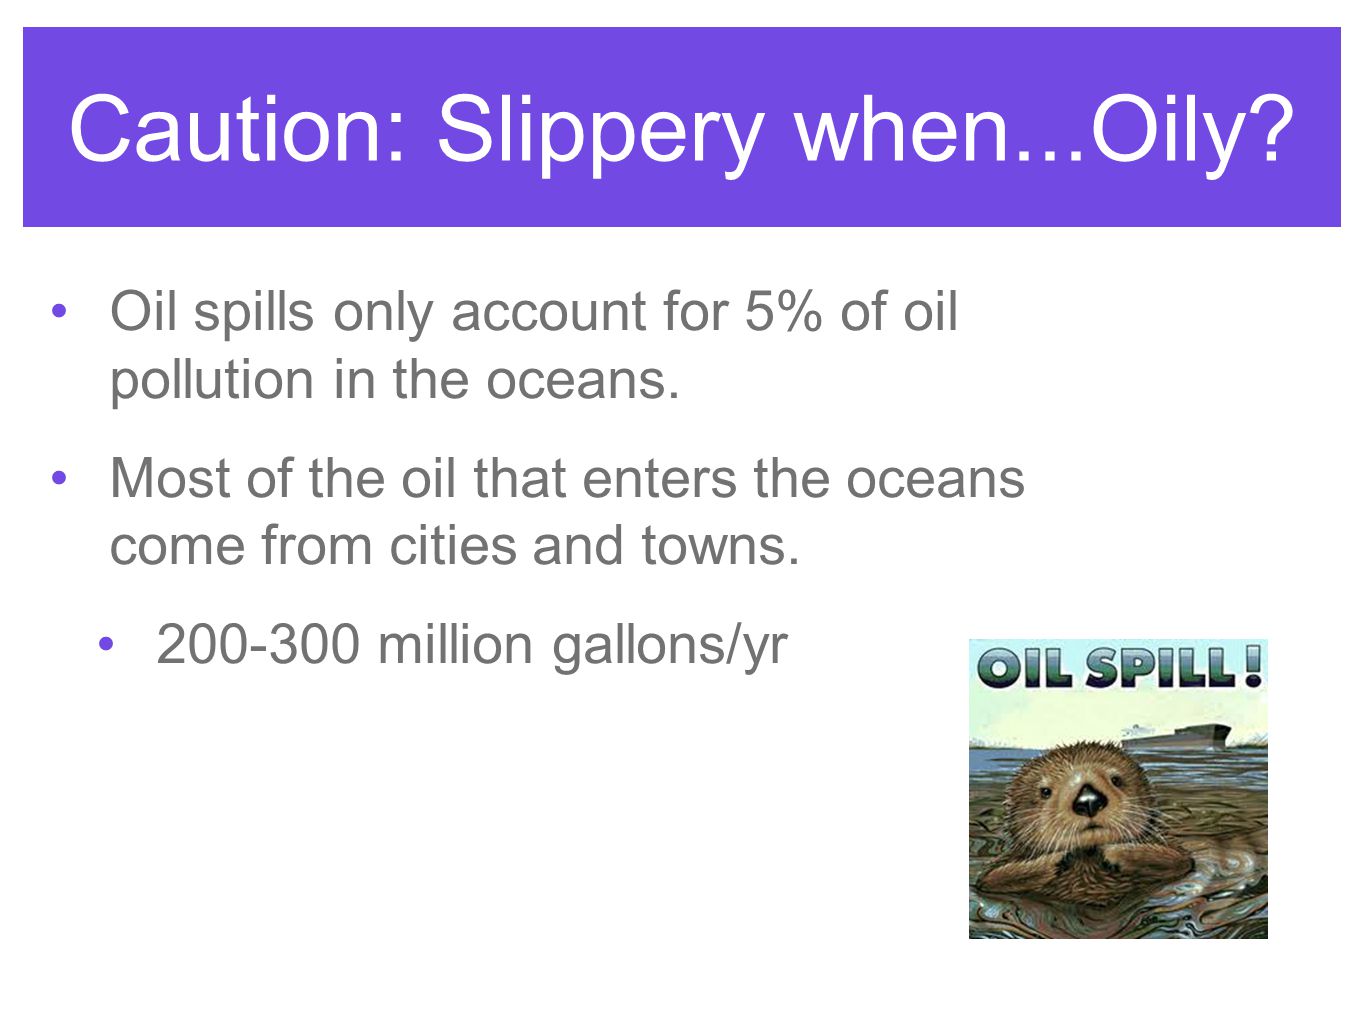 Caution: Slippery when...Oily